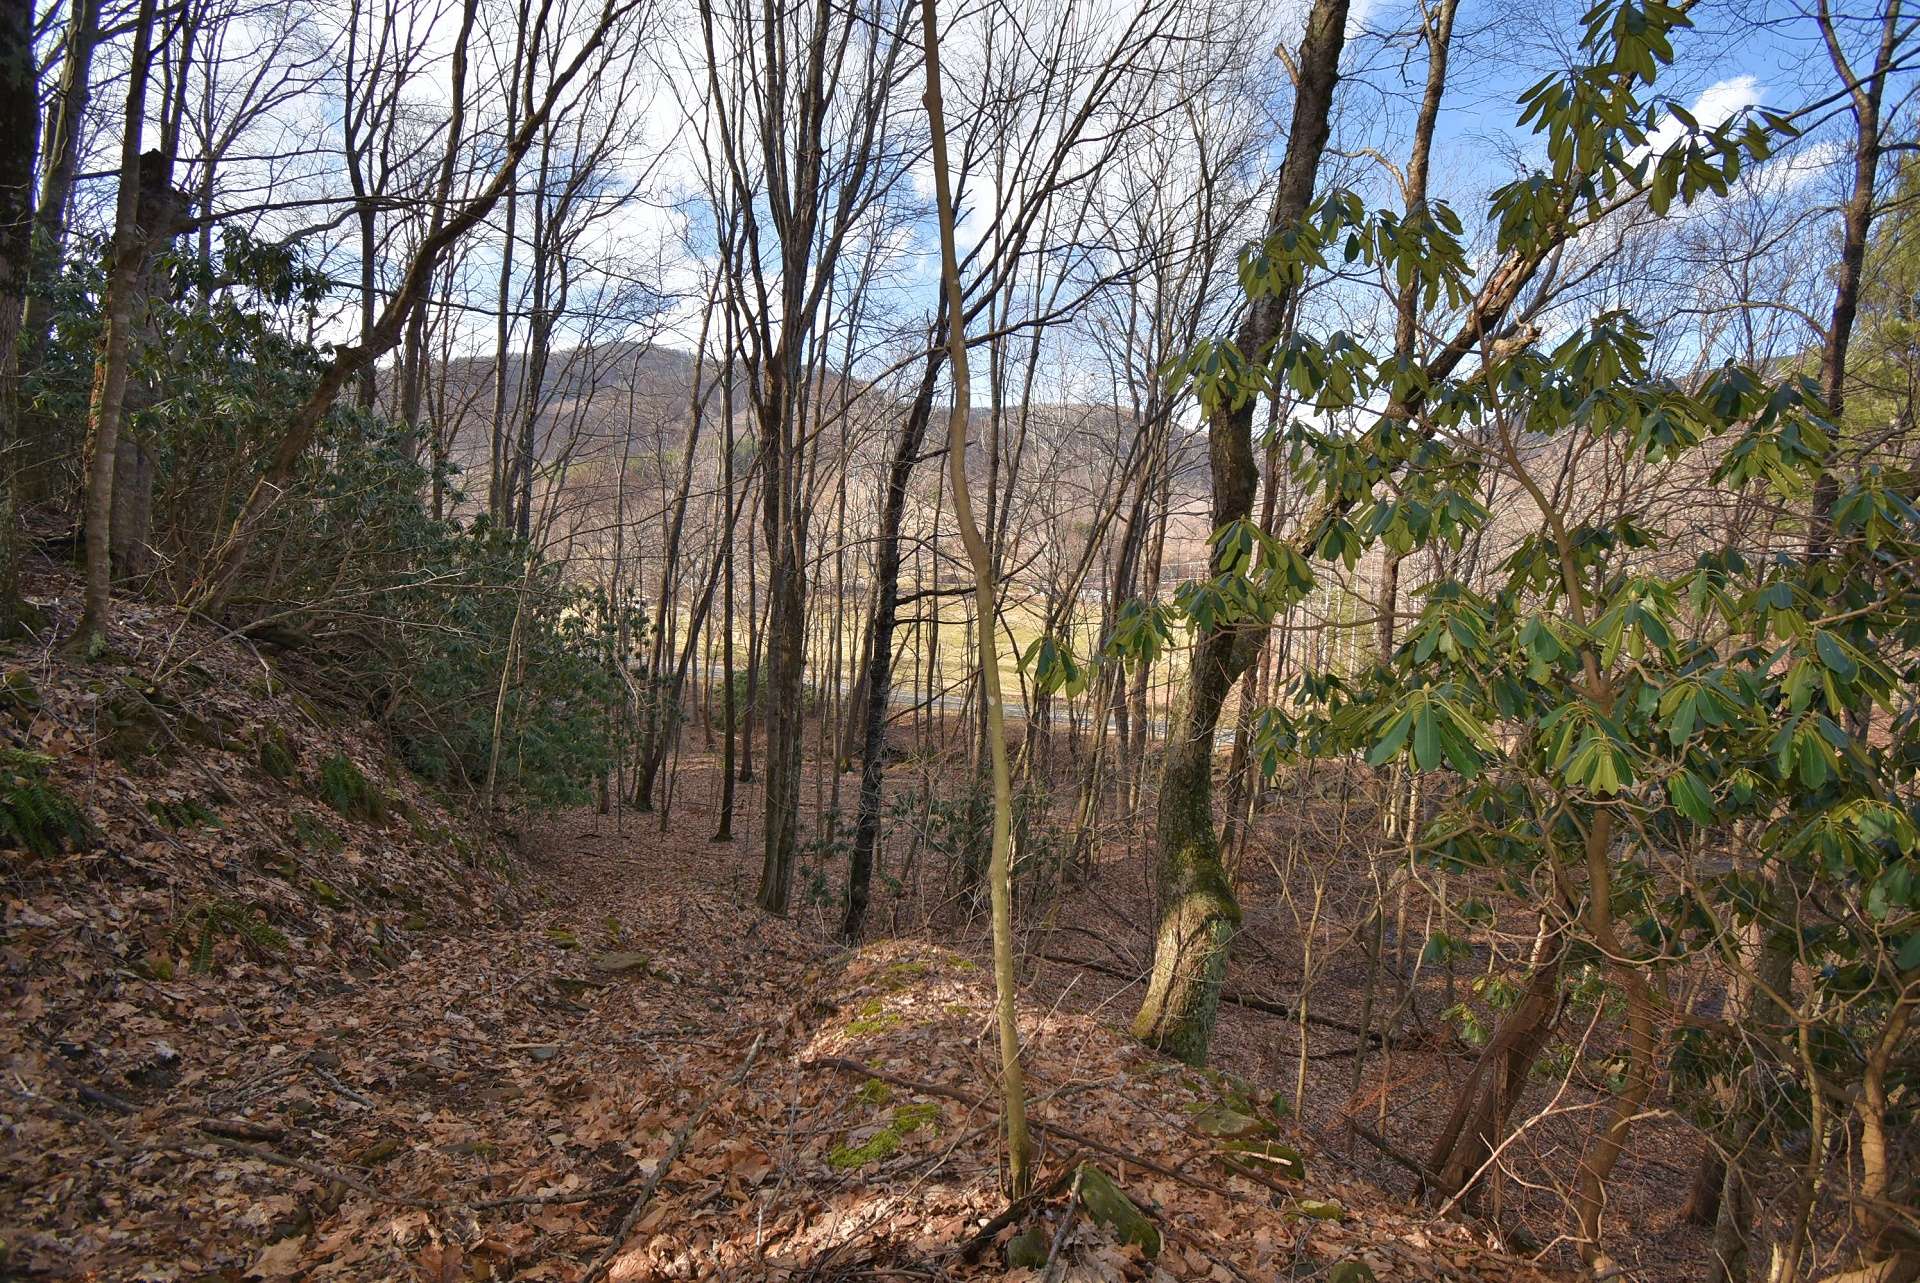 There are multiple potential building sites. You might decide to build your mountain home or cabin beneath towering hardwoods, or on a knoll with views of Three Top Mountain. The choice is yours.